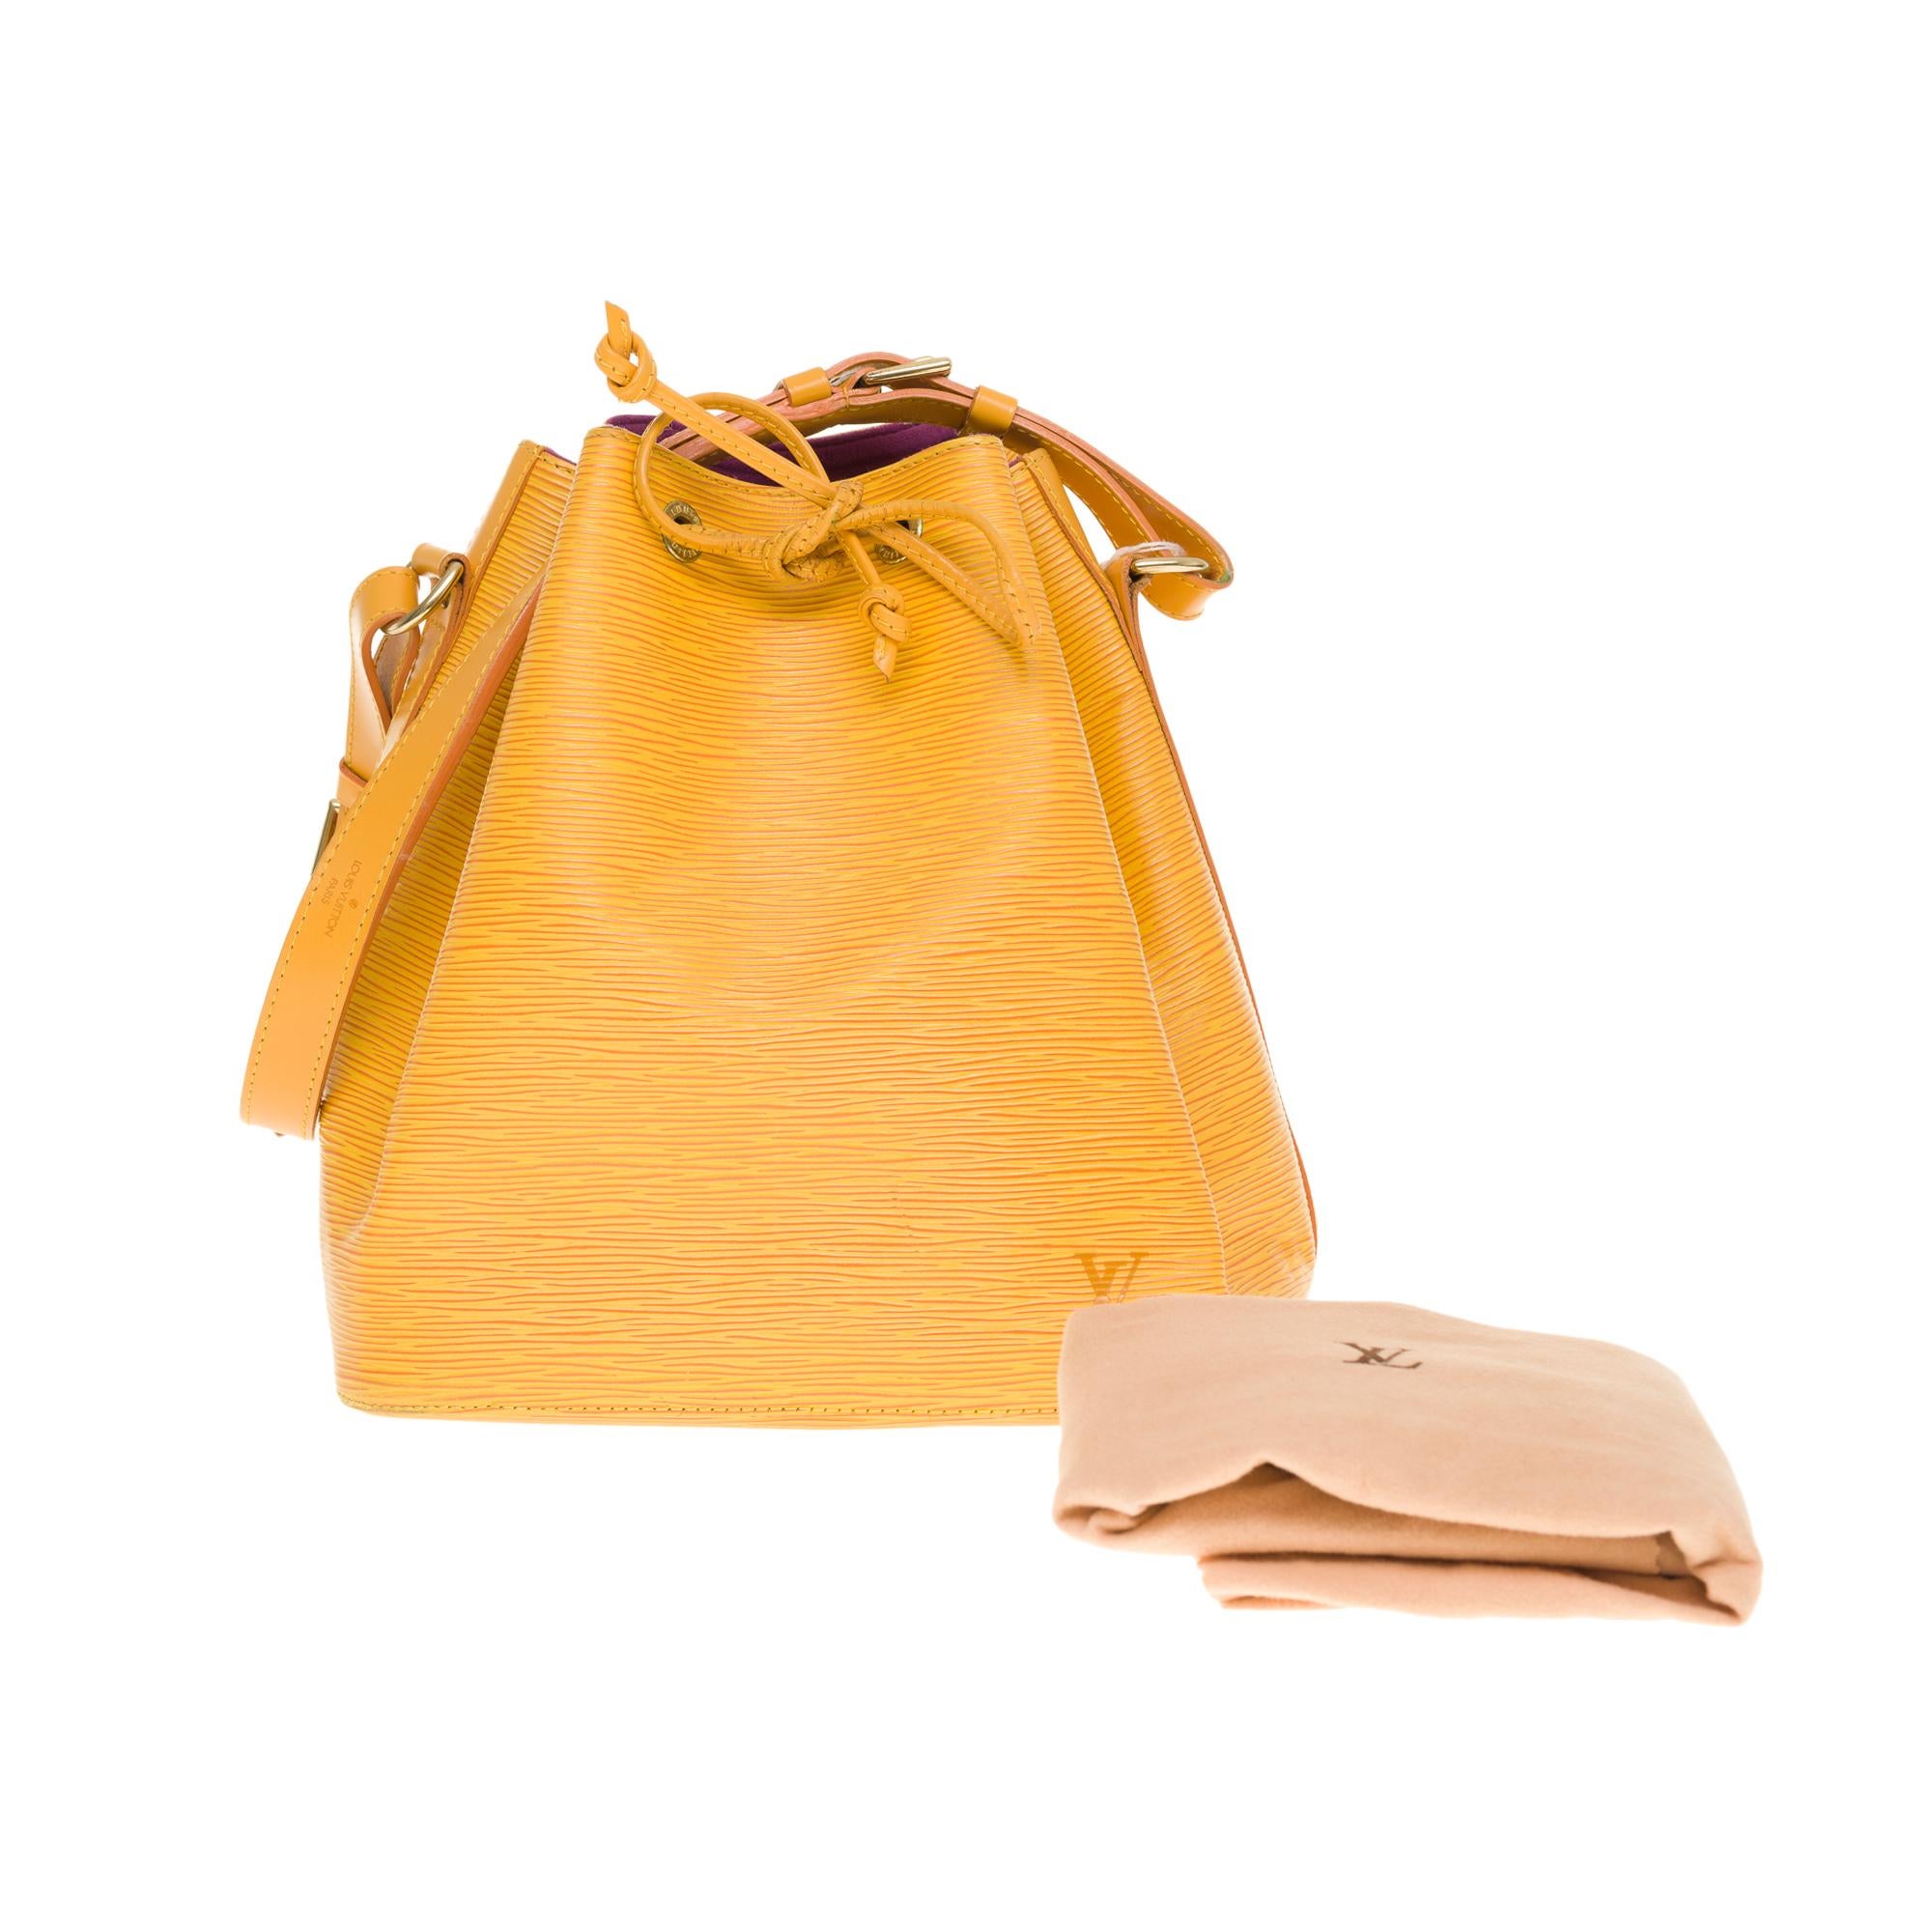 Louis Vuitton Noé shoulder bag in yellow epi leather with GHW 3